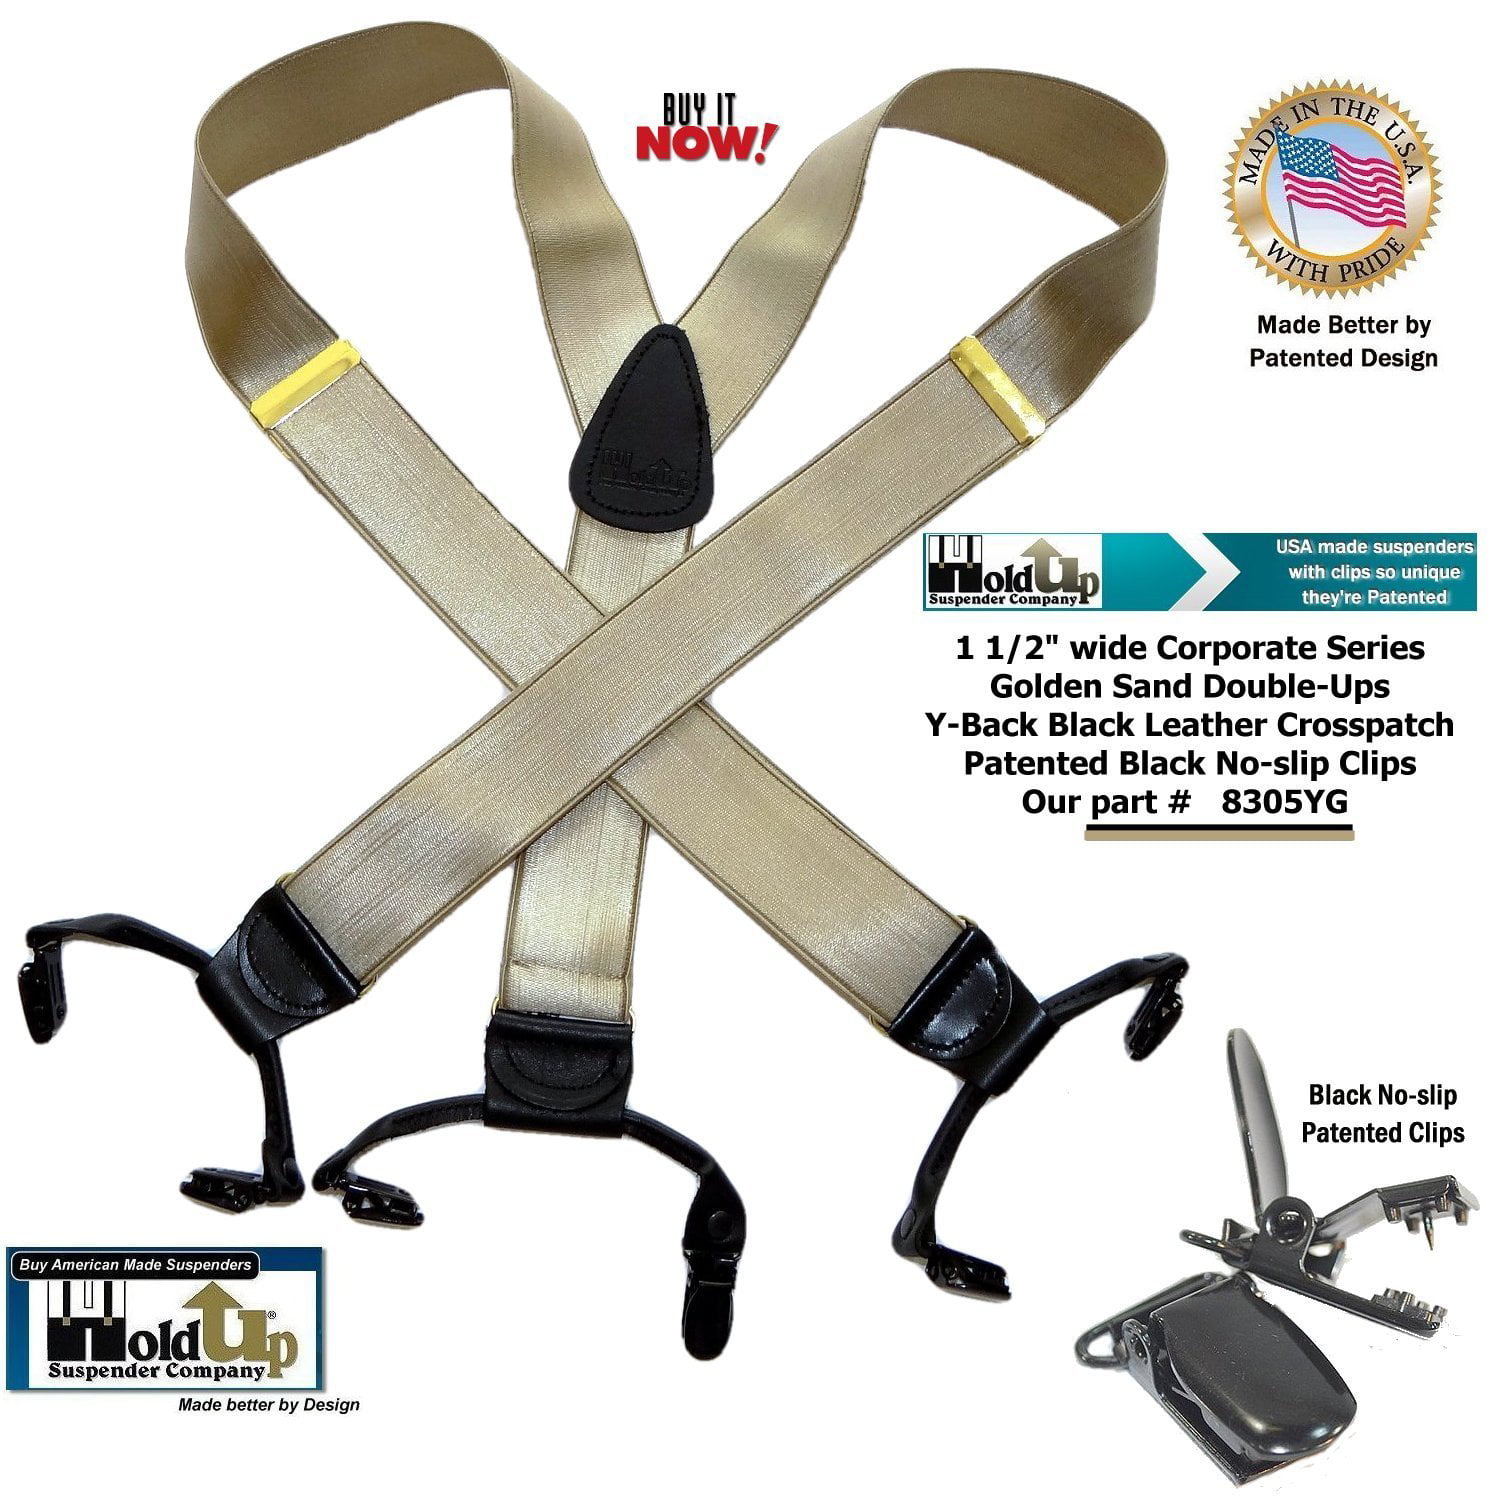 Details about   VELCRO® ONE-WRAP® Self-Gripping Strap 1-1/2" Wide FAST SHIPPING BY THE FOOT 